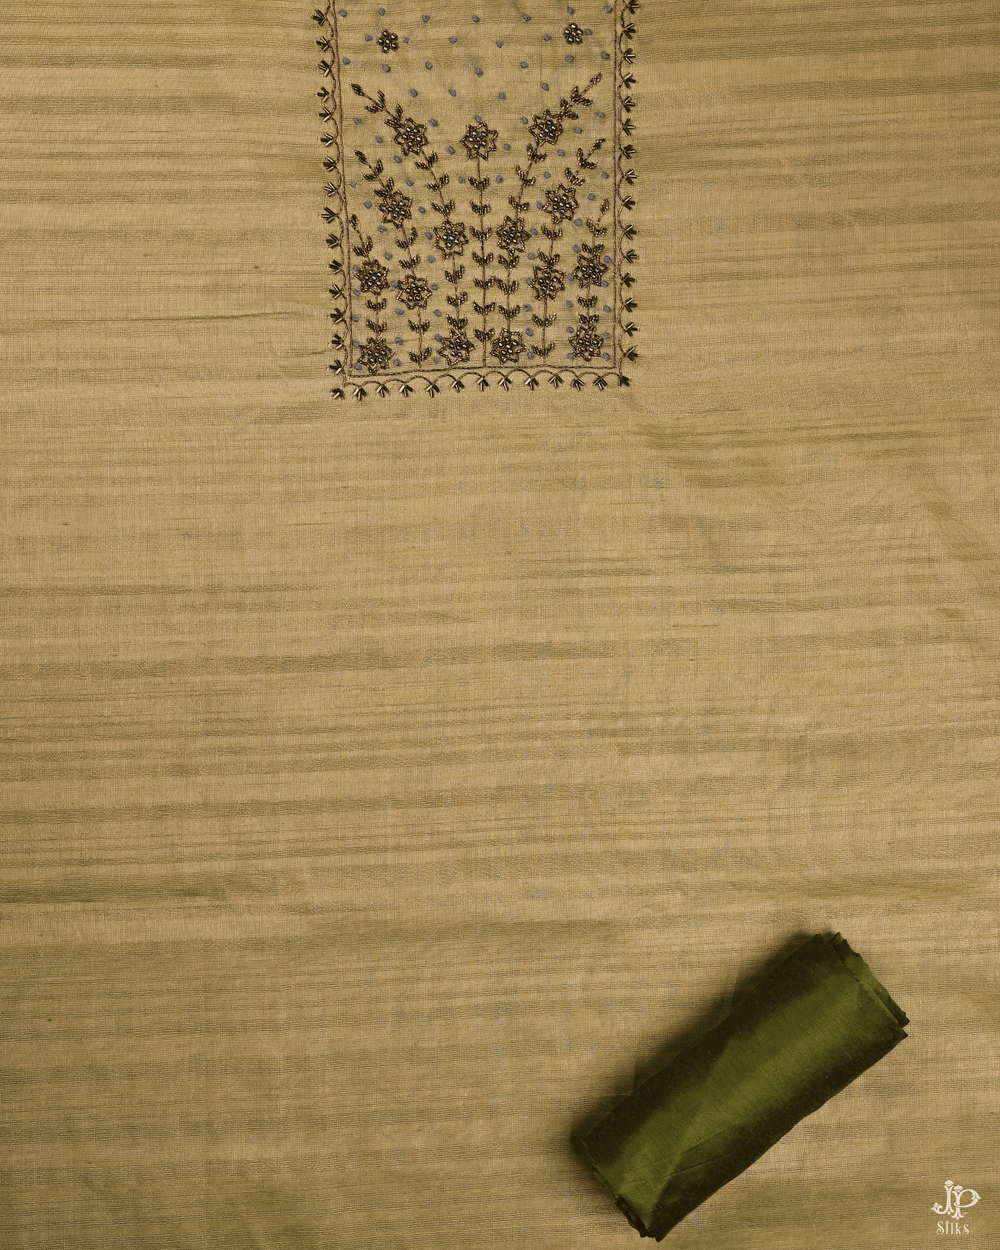 Olive Green Unstitched Chudidhar Material - D5189 - View 2